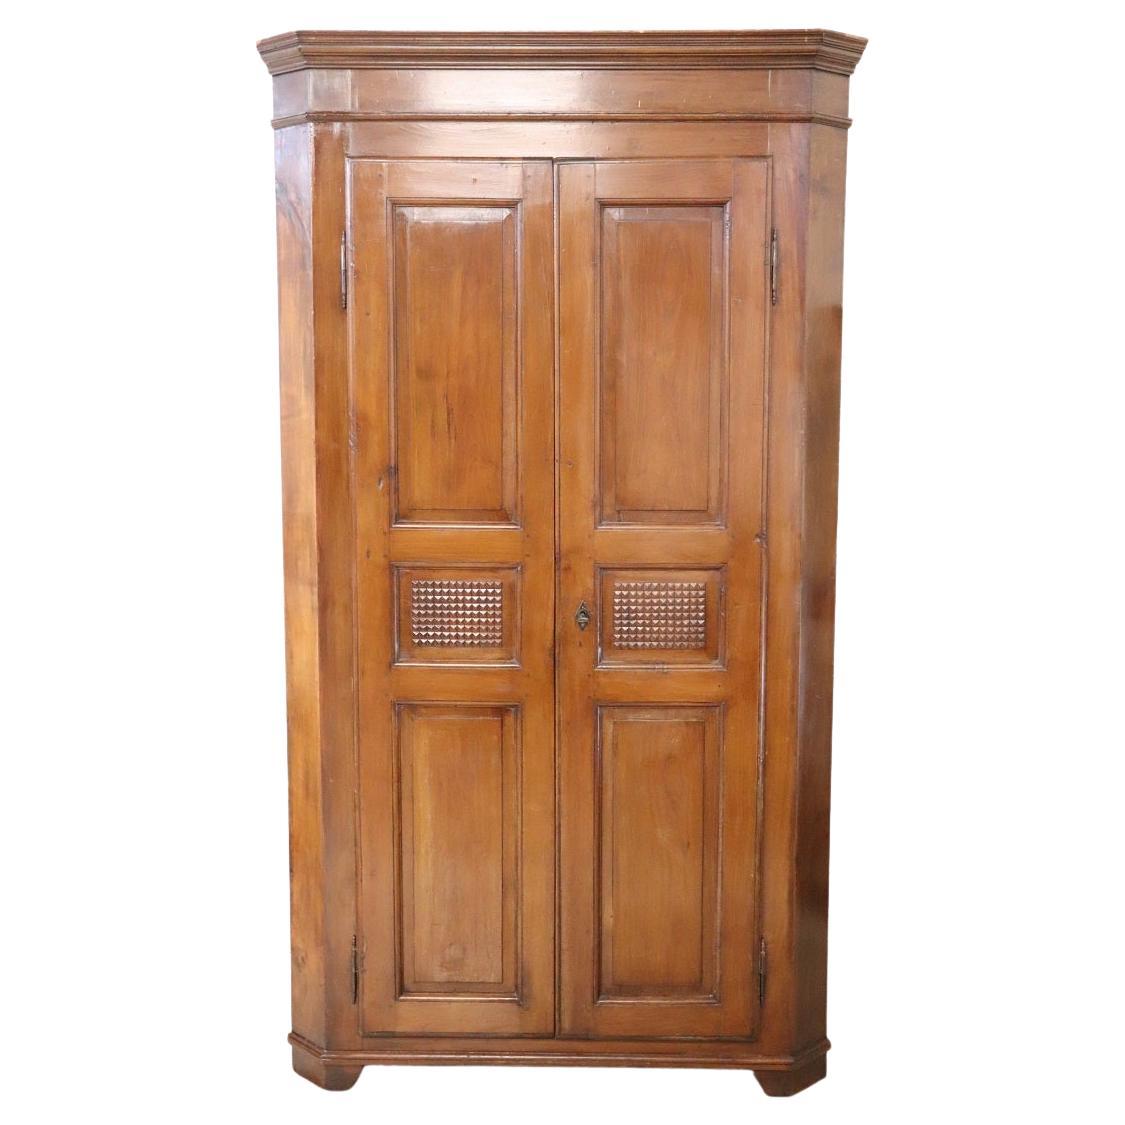 Early 20th Century  Solid Walnut Corner Cupboard or Corner Cabinet For Sale